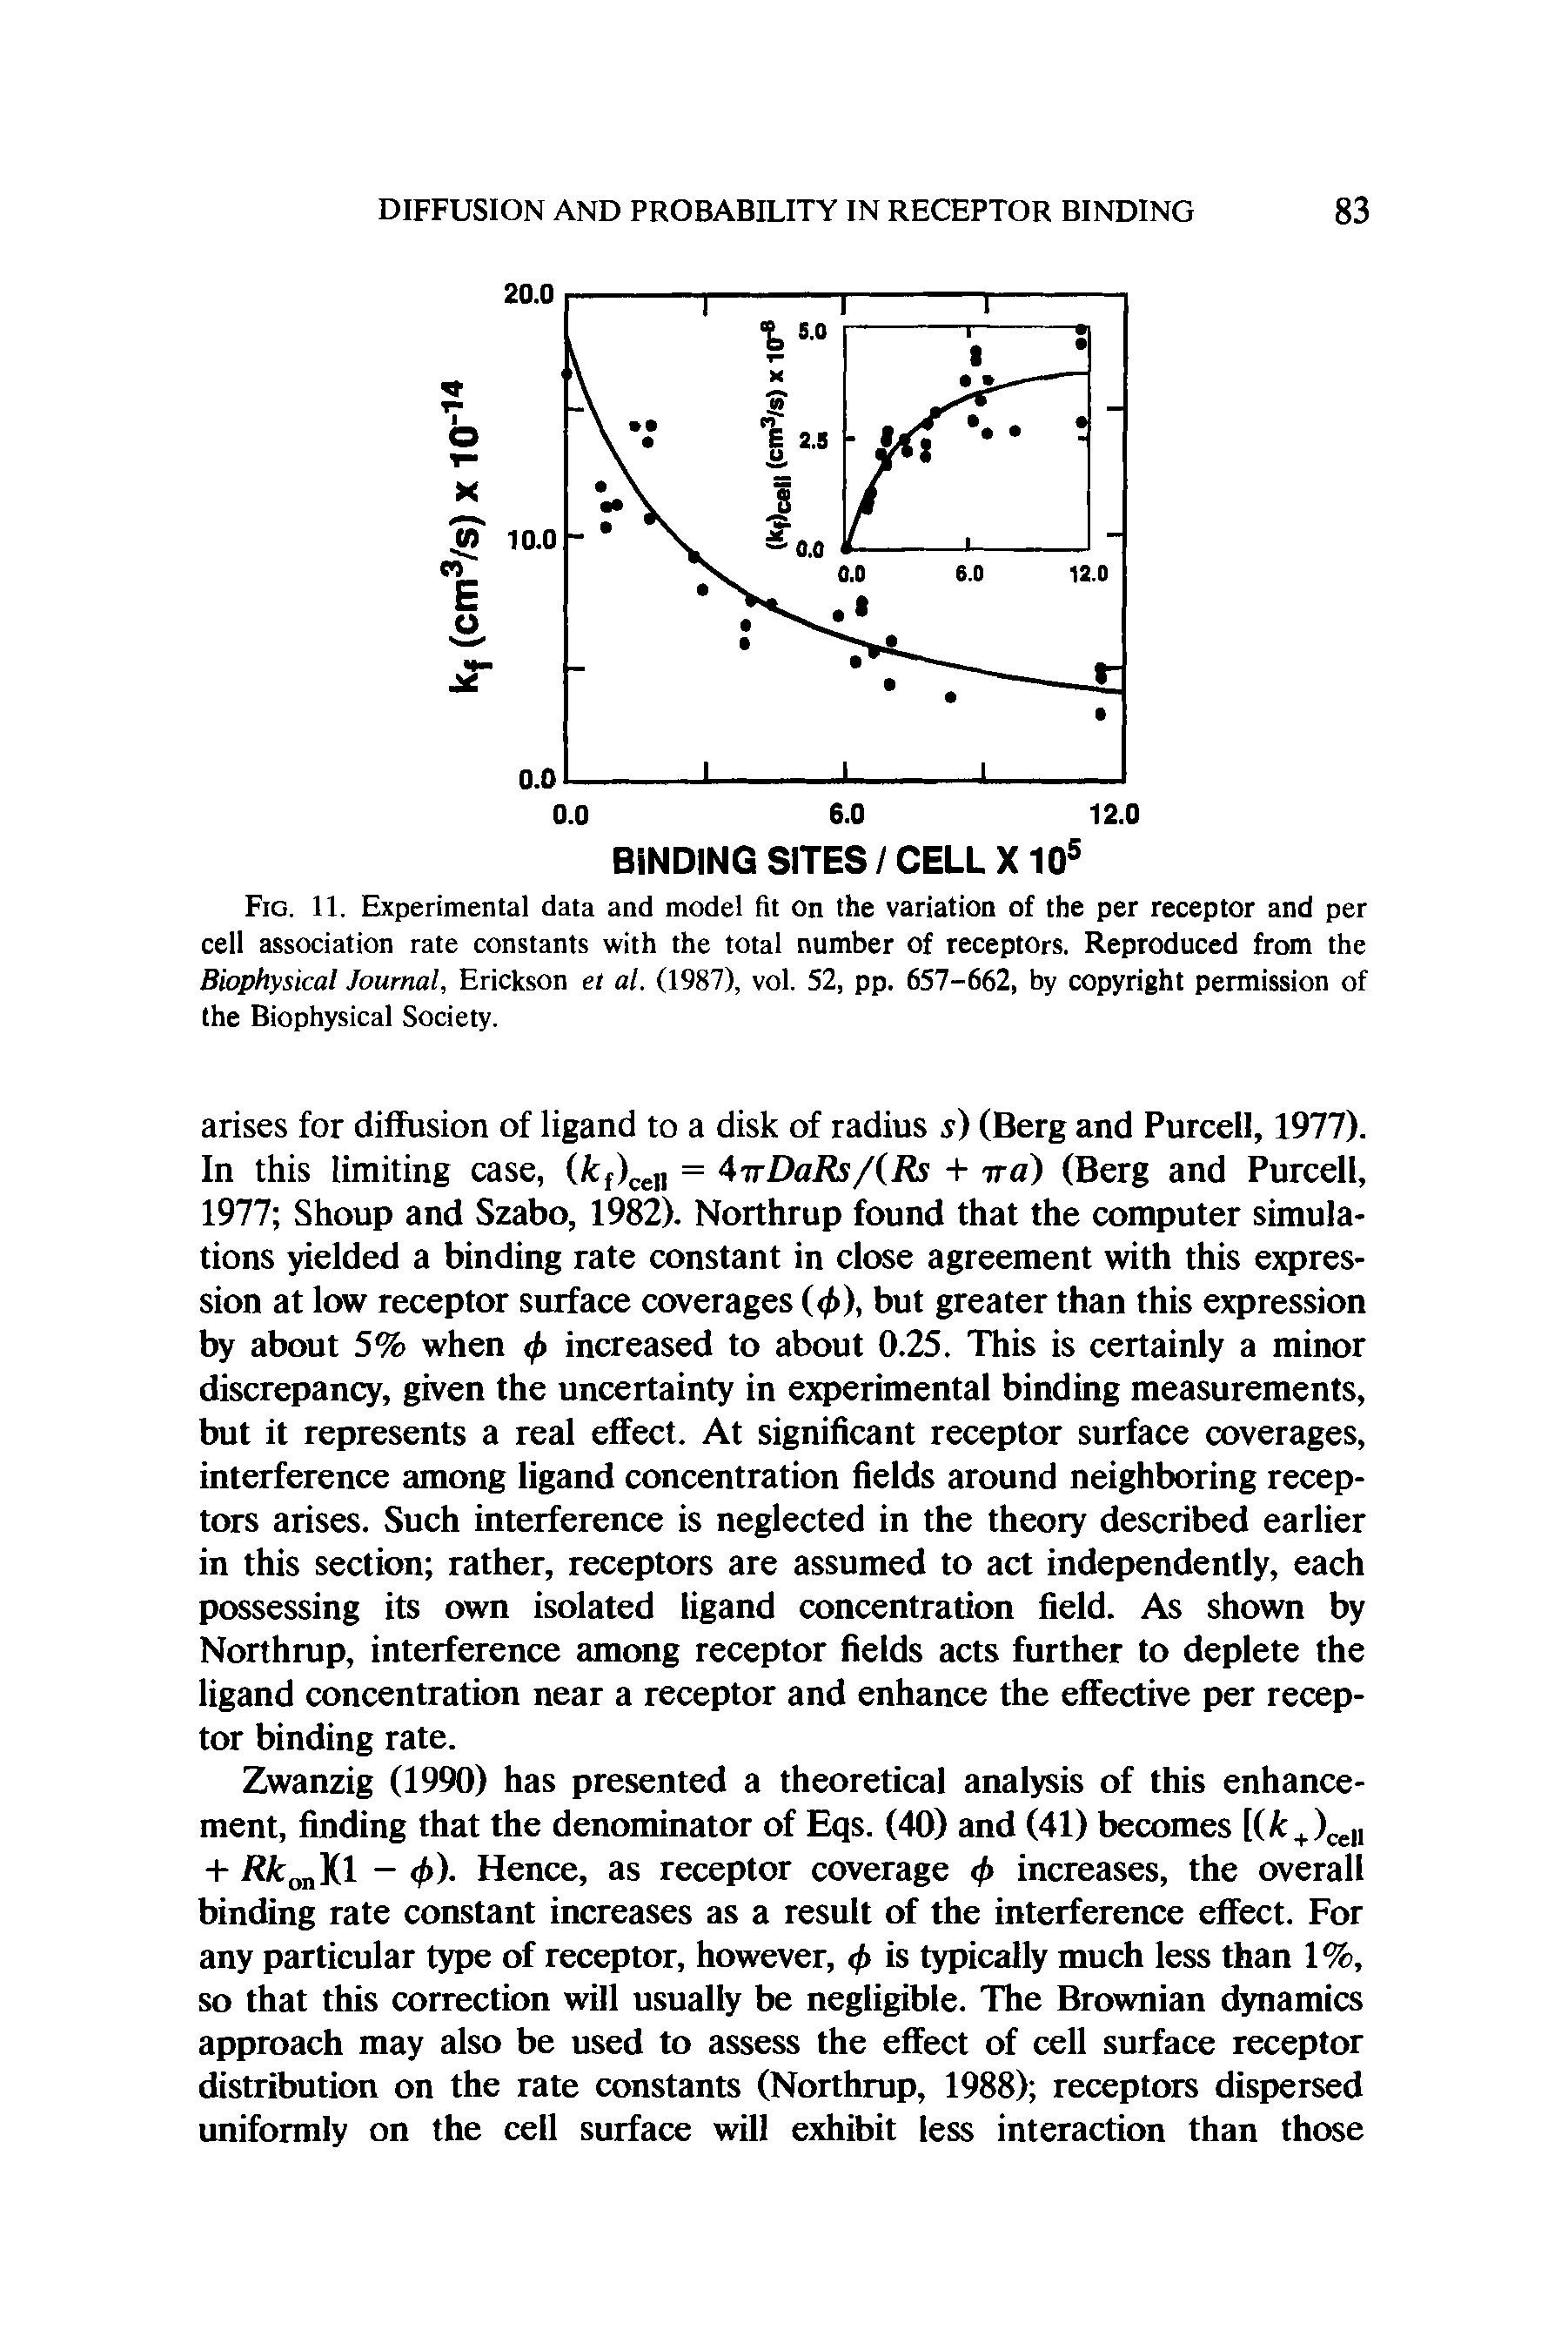 Fig. 11. Experimental data and model fit on the variation of the per receptor and per cell association rate constants with the total number of receptors. Reproduced from the Biophysical Journal, Erickson et al. (1987), vol. 52, pp. 657-662, by copyright permission of the Biophysical Society.